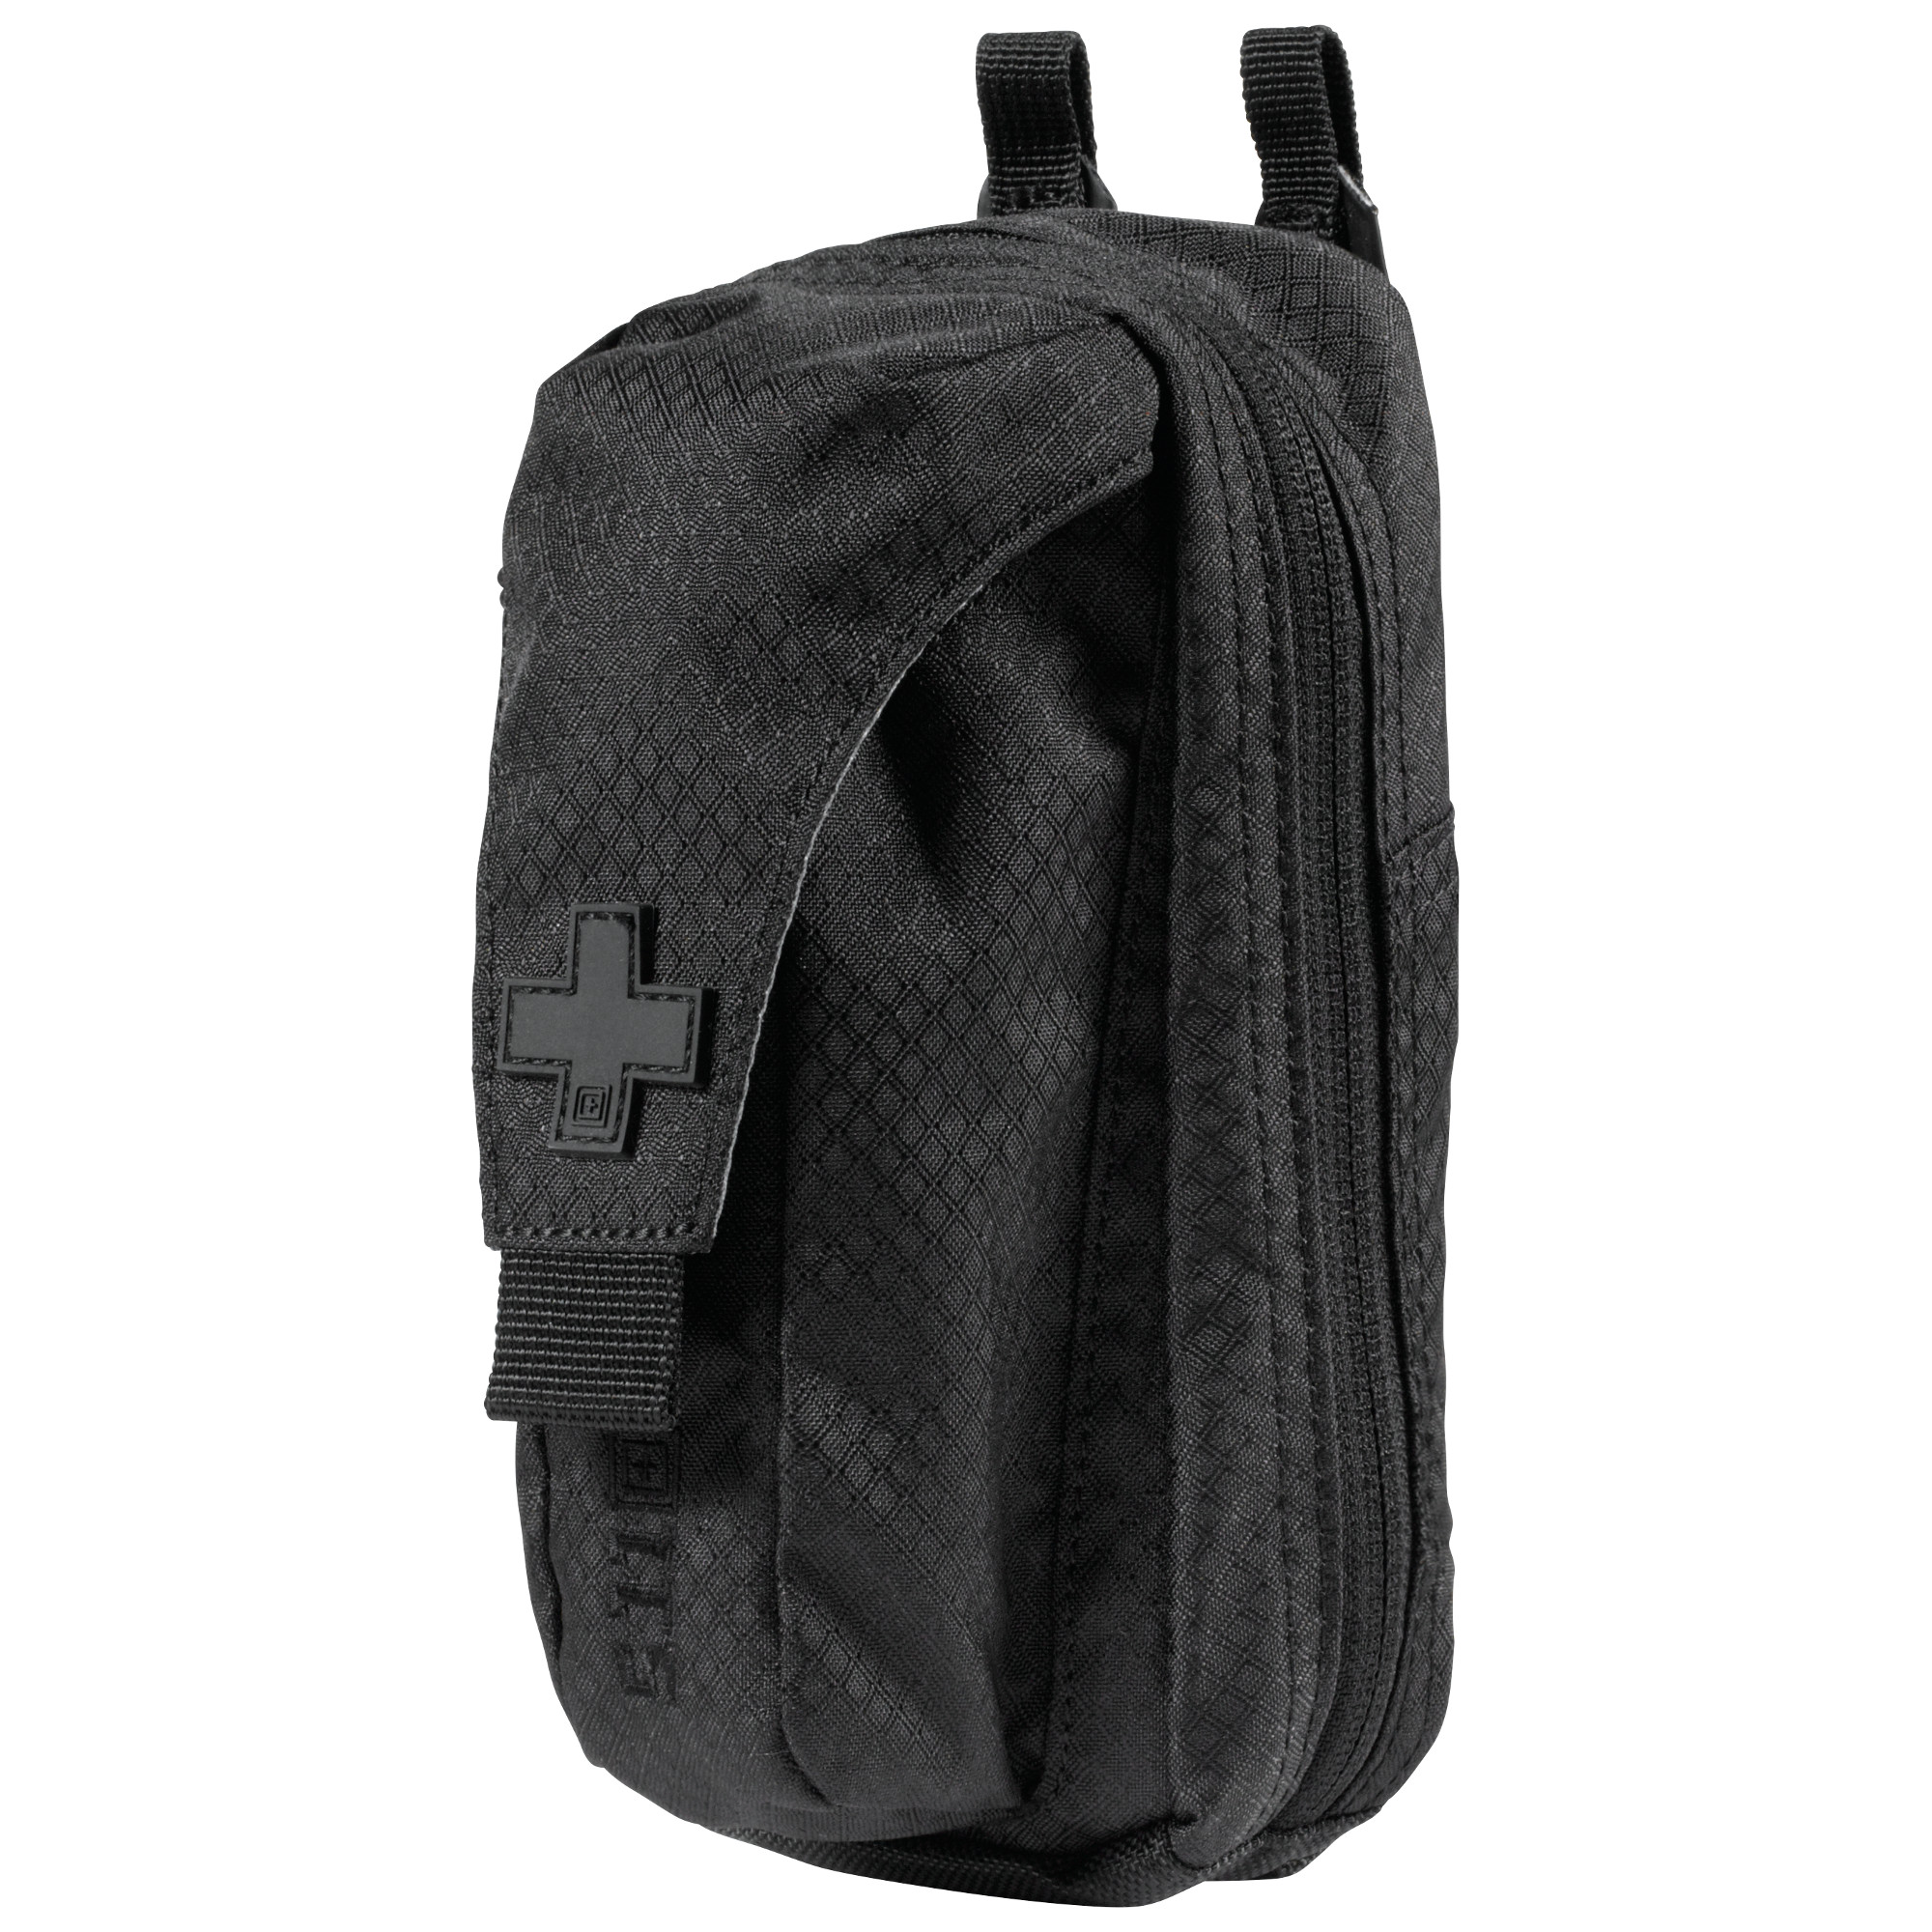 Pouzdro 5.11 Ignitor Med Pouch - BLACK #019